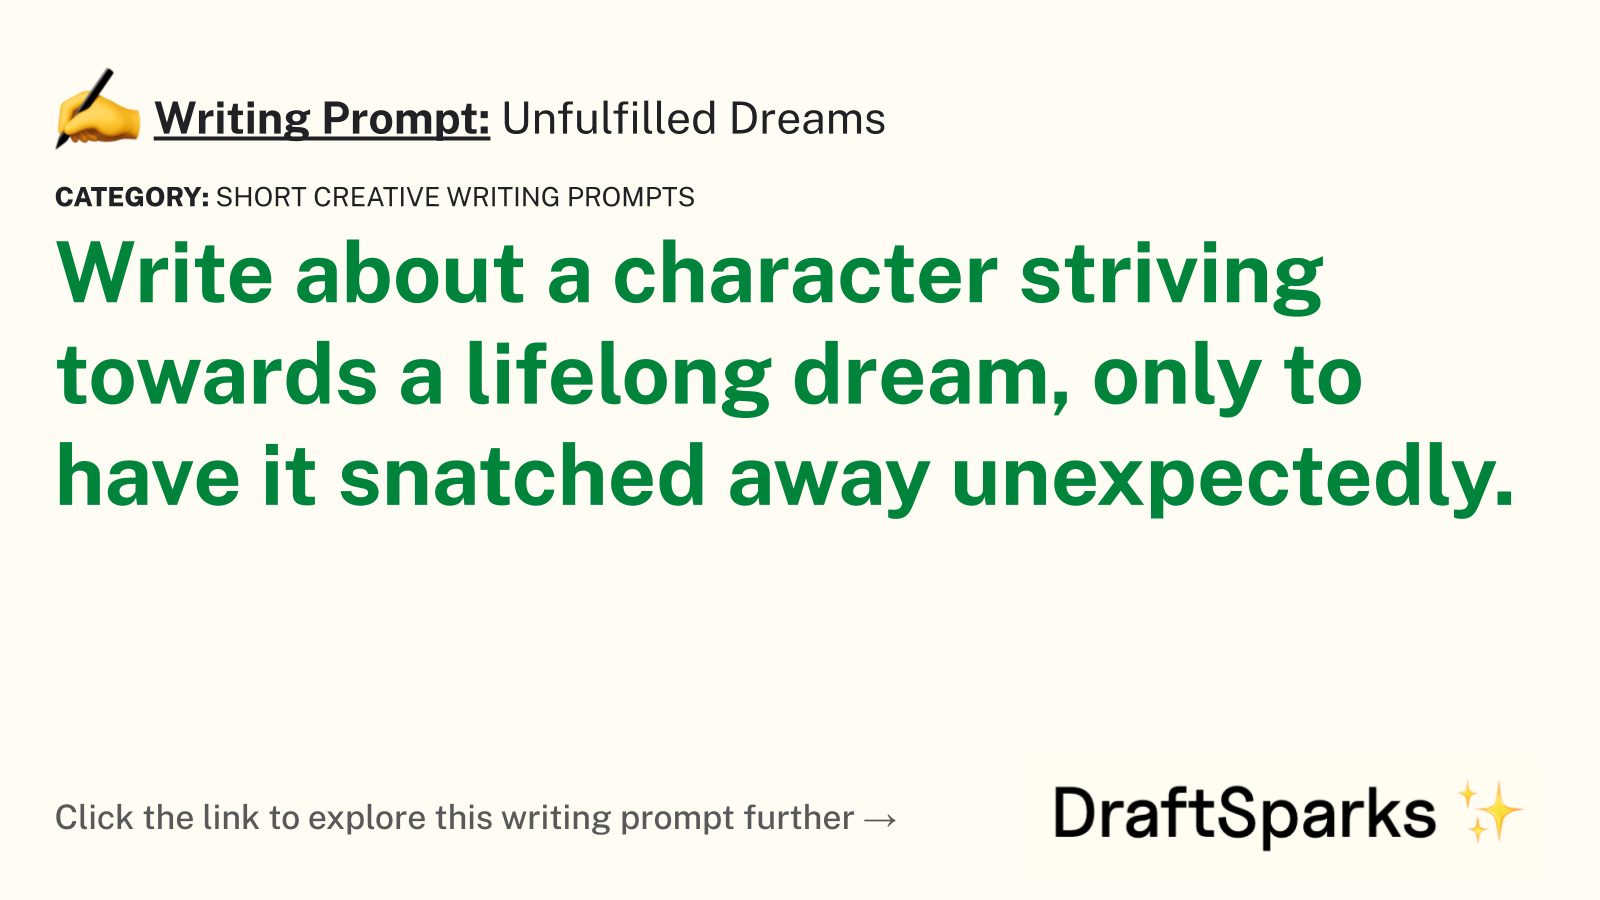 Unfulfilled Dreams